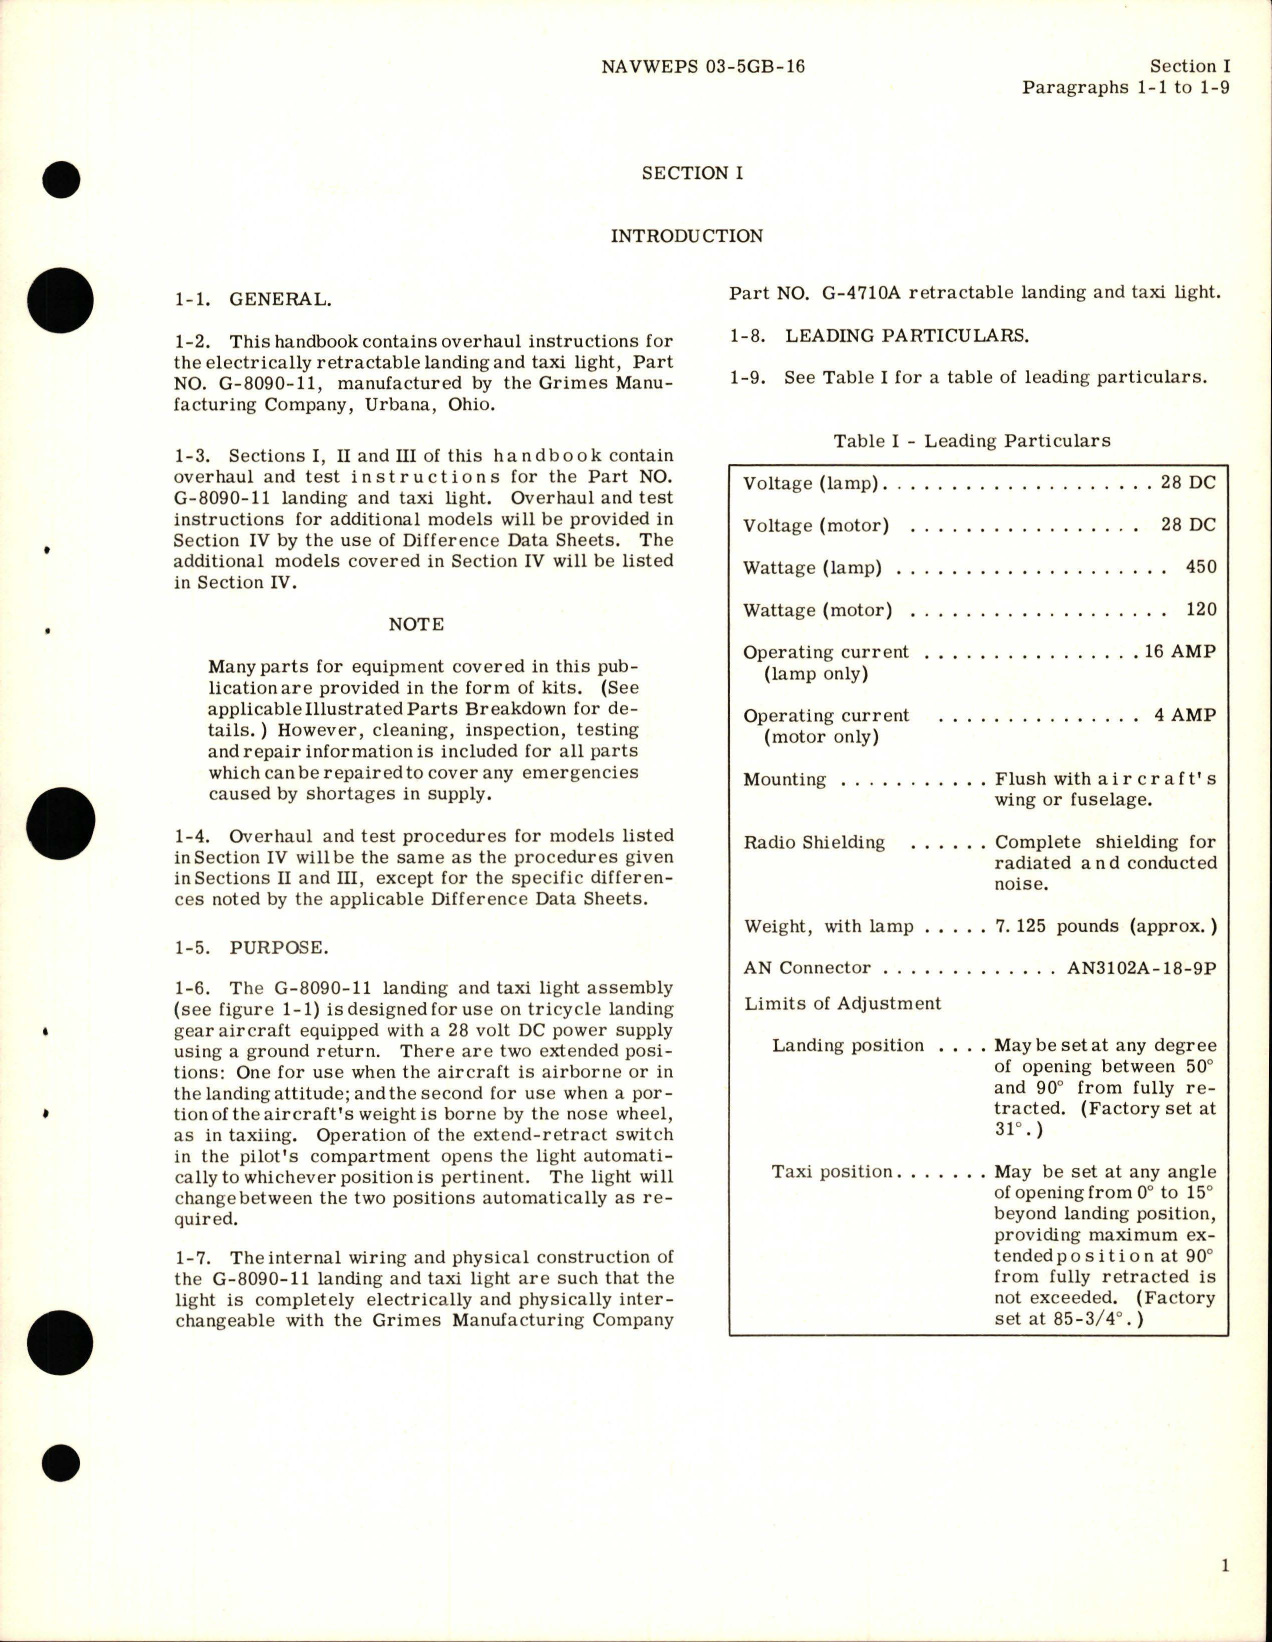 Sample page 5 from AirCorps Library document: Overhaul Instructions for Landing and Taxi Light Assembly - Part G-8090-11 